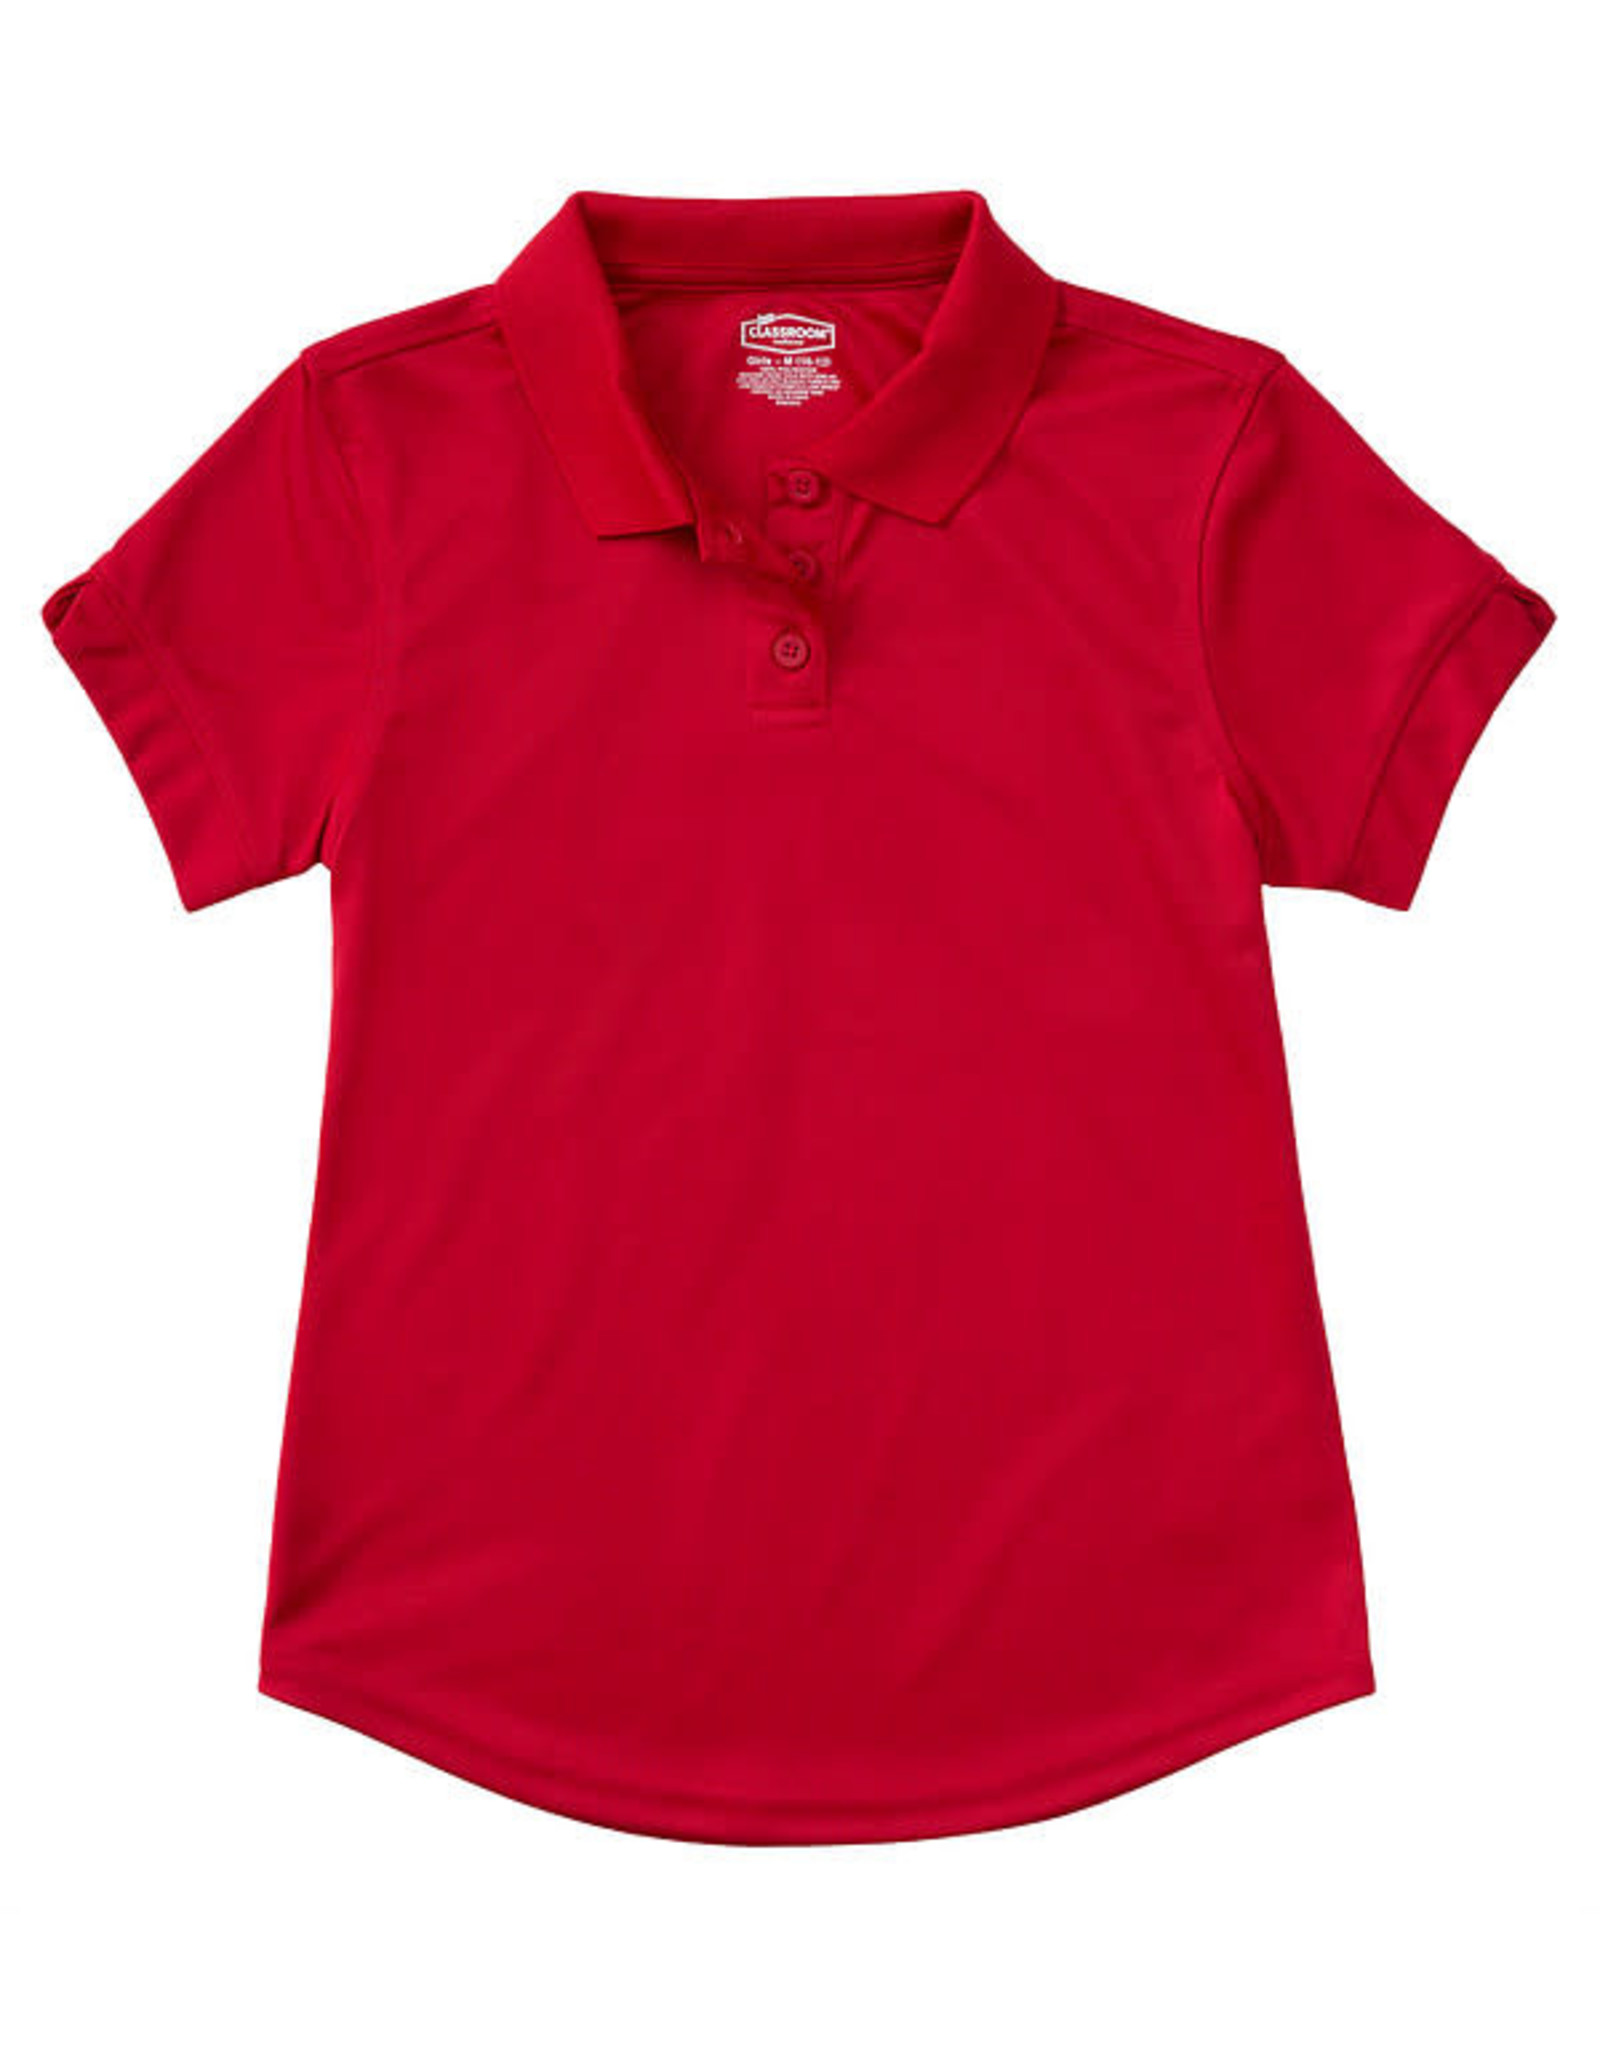 Classroom Junior S/S Polo Moisture Wicking RED 2XL